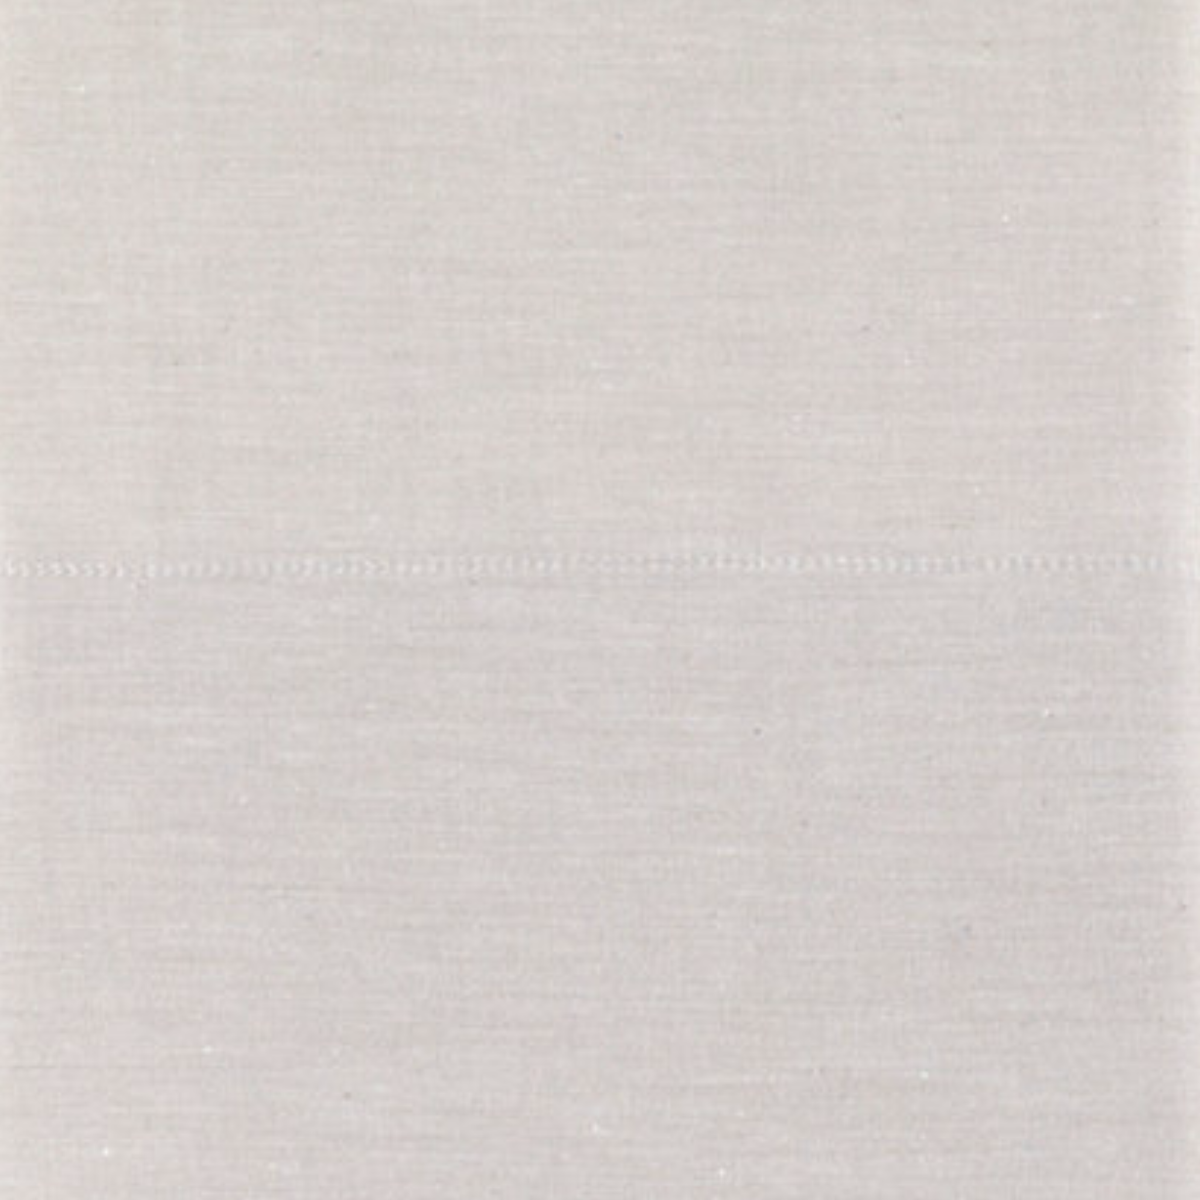 Swatch Sample of Pine Cone Hill Cozy Cotton Bedding in Dove Grey Color